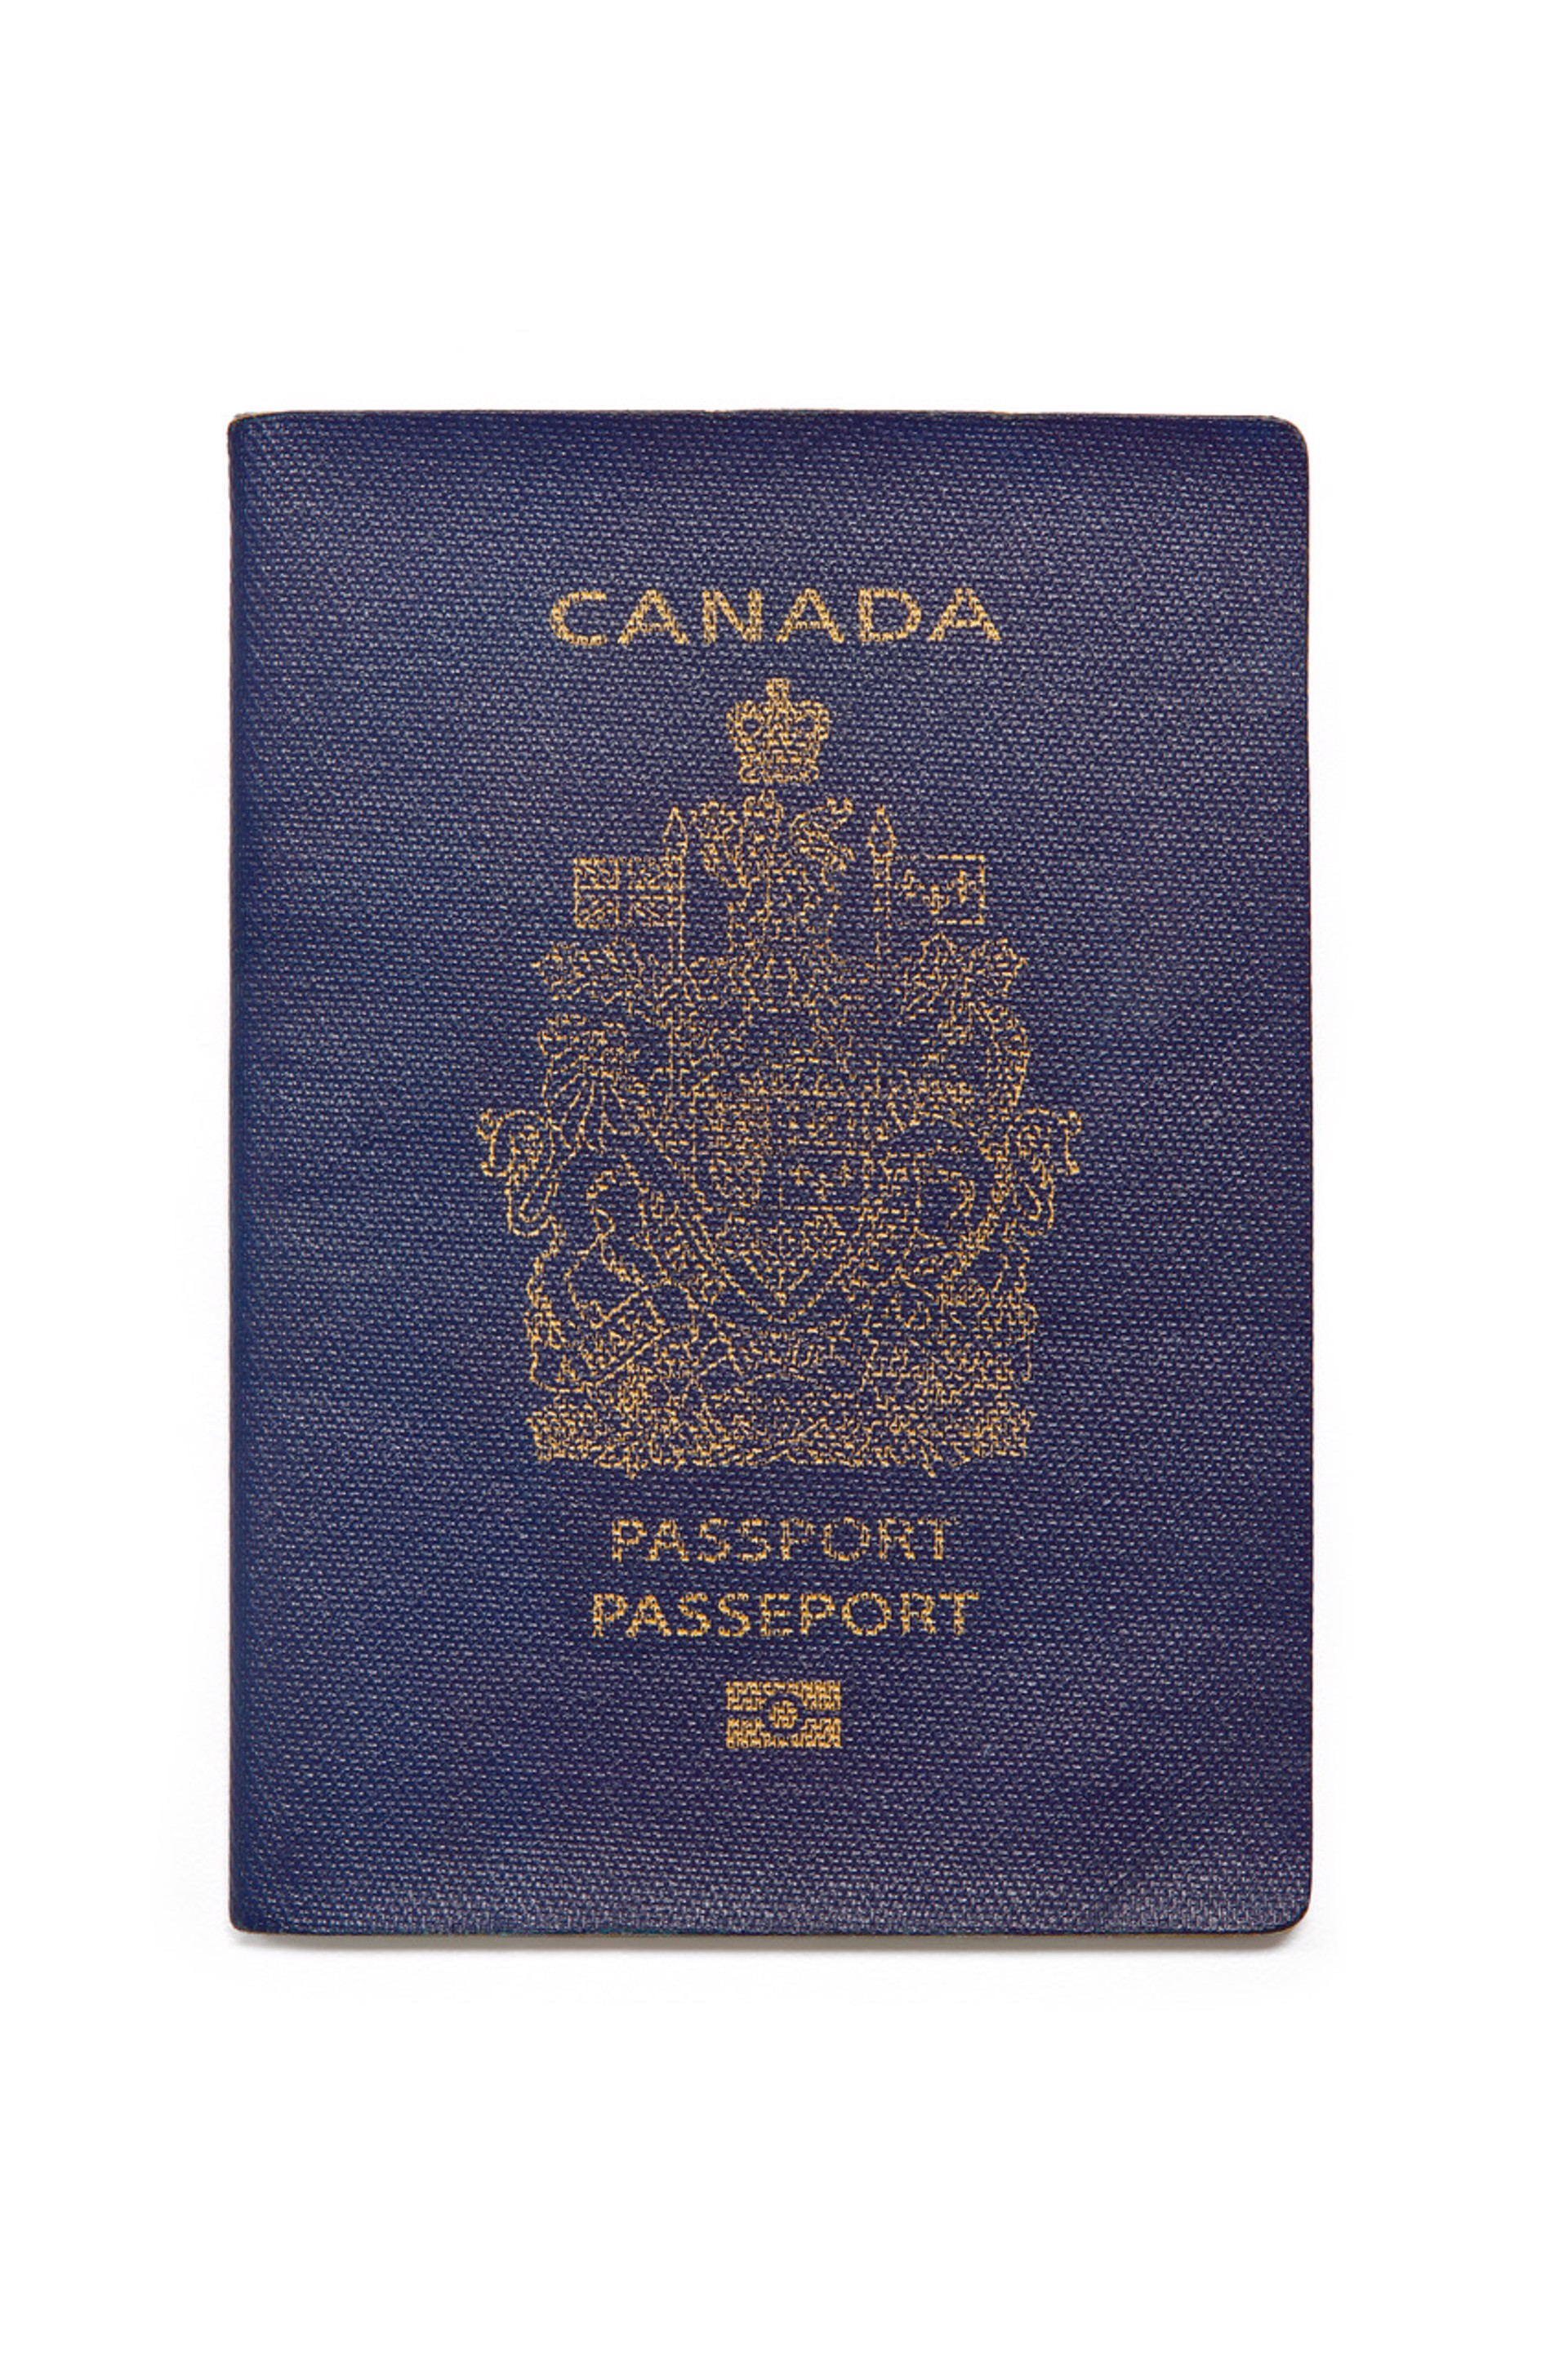 Canada Passport by Peter Andrew Lusztyk | Collectibles